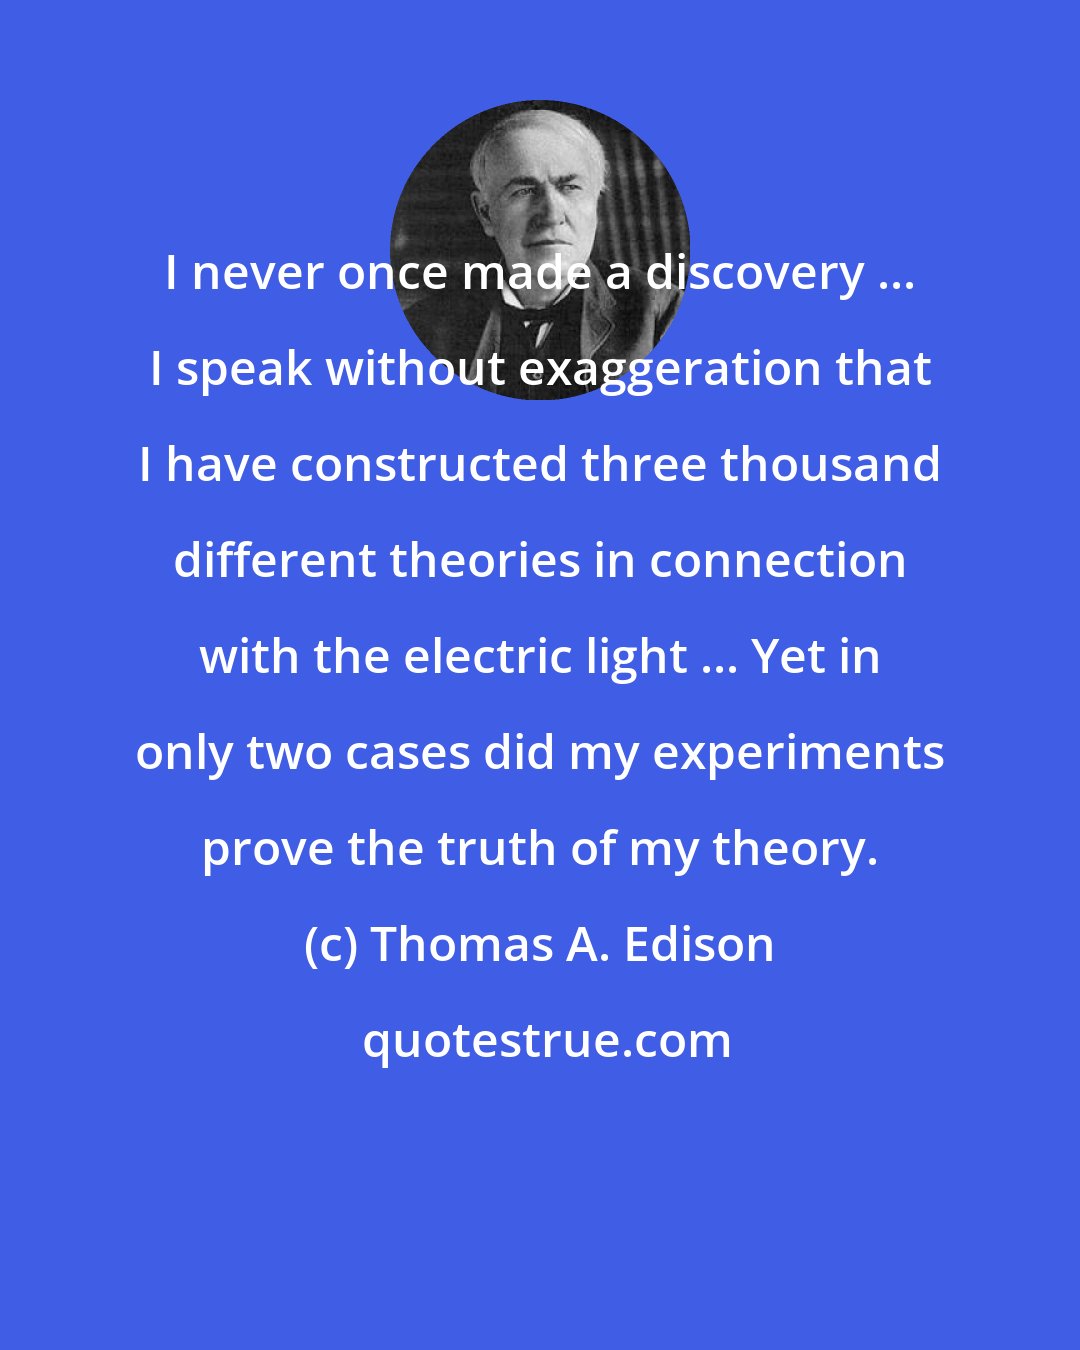 Thomas A. Edison: I never once made a discovery ... I speak without exaggeration that I have constructed three thousand different theories in connection with the electric light ... Yet in only two cases did my experiments prove the truth of my theory.